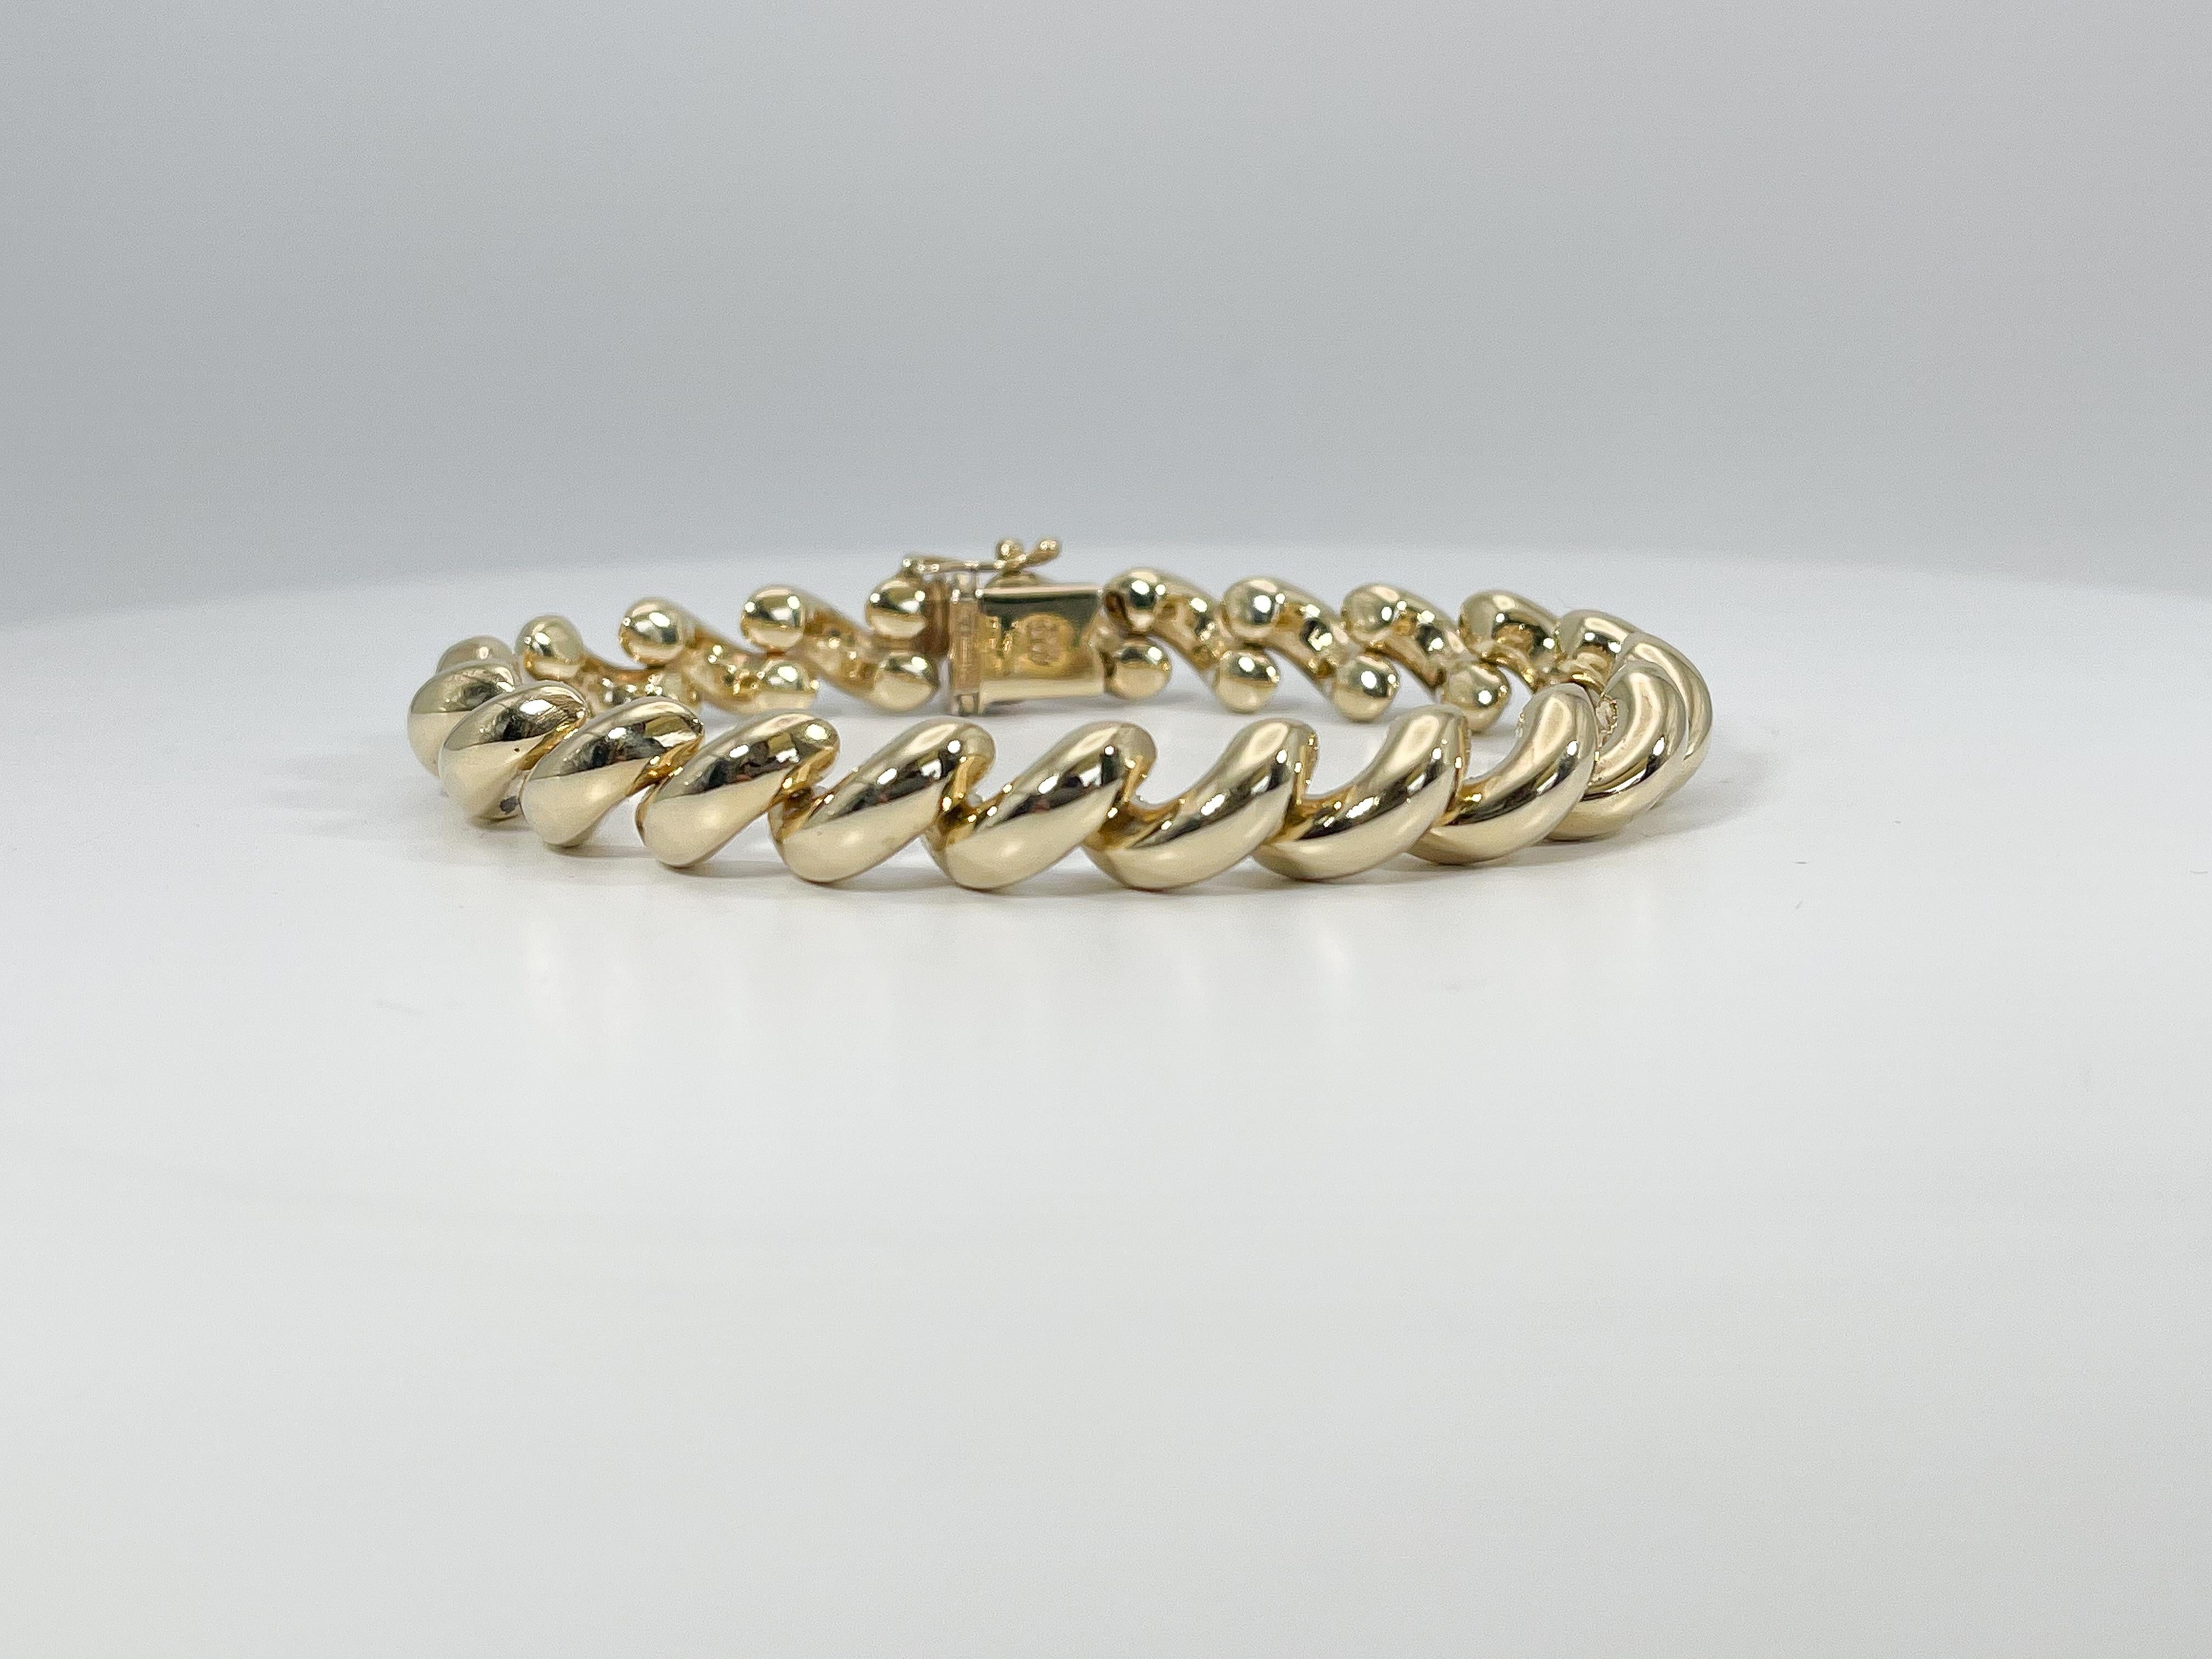 14k yellow gold San Marco Bracelet. This bracelet has a figure 8 clasp to open and close, the width is 9.7 mm, the length is 8 inches, and it has a total weight of 26.5 grams.